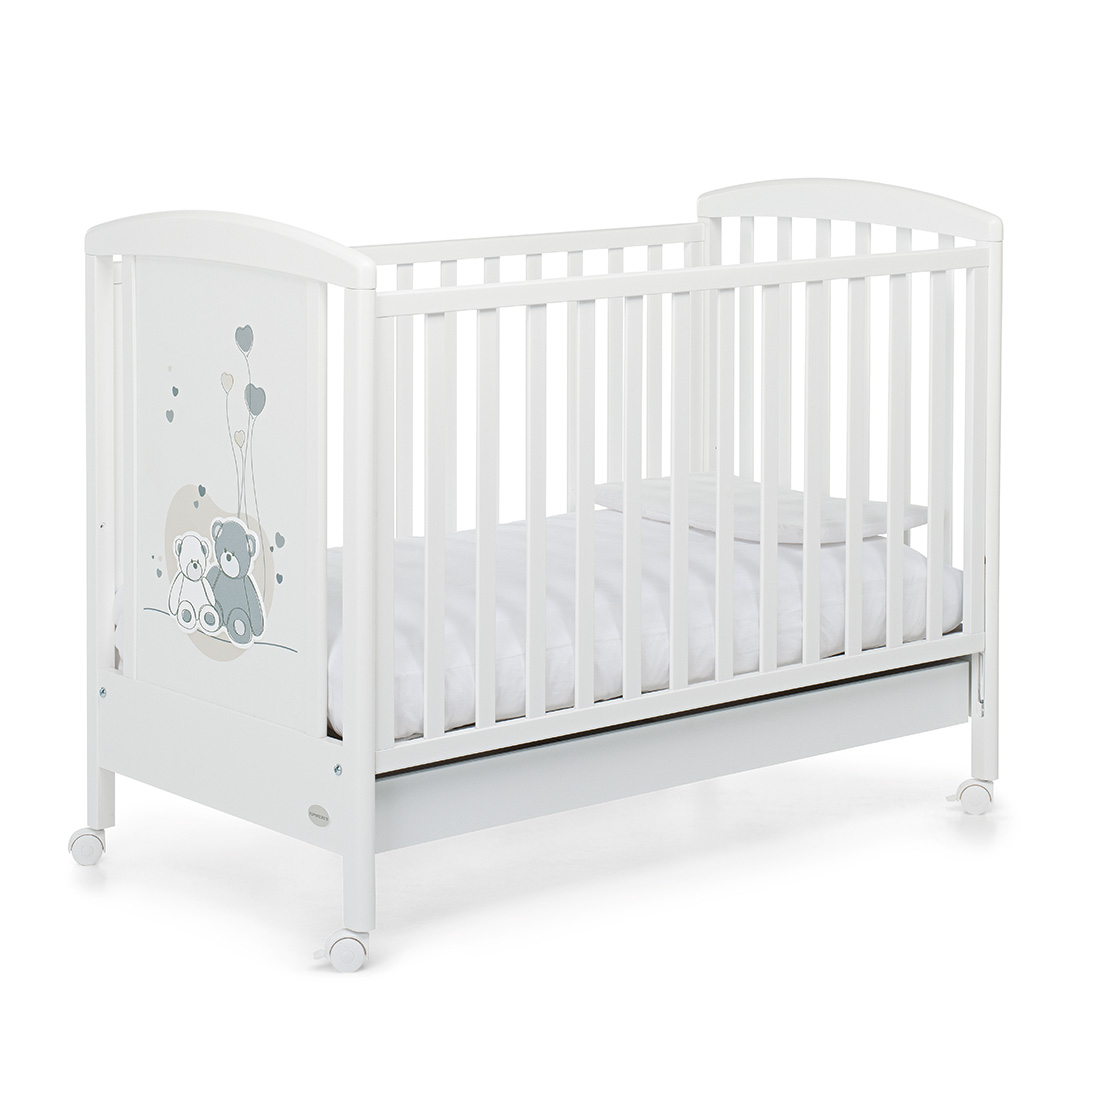 The Patty wooden cot by Foppapedretti - Official Website